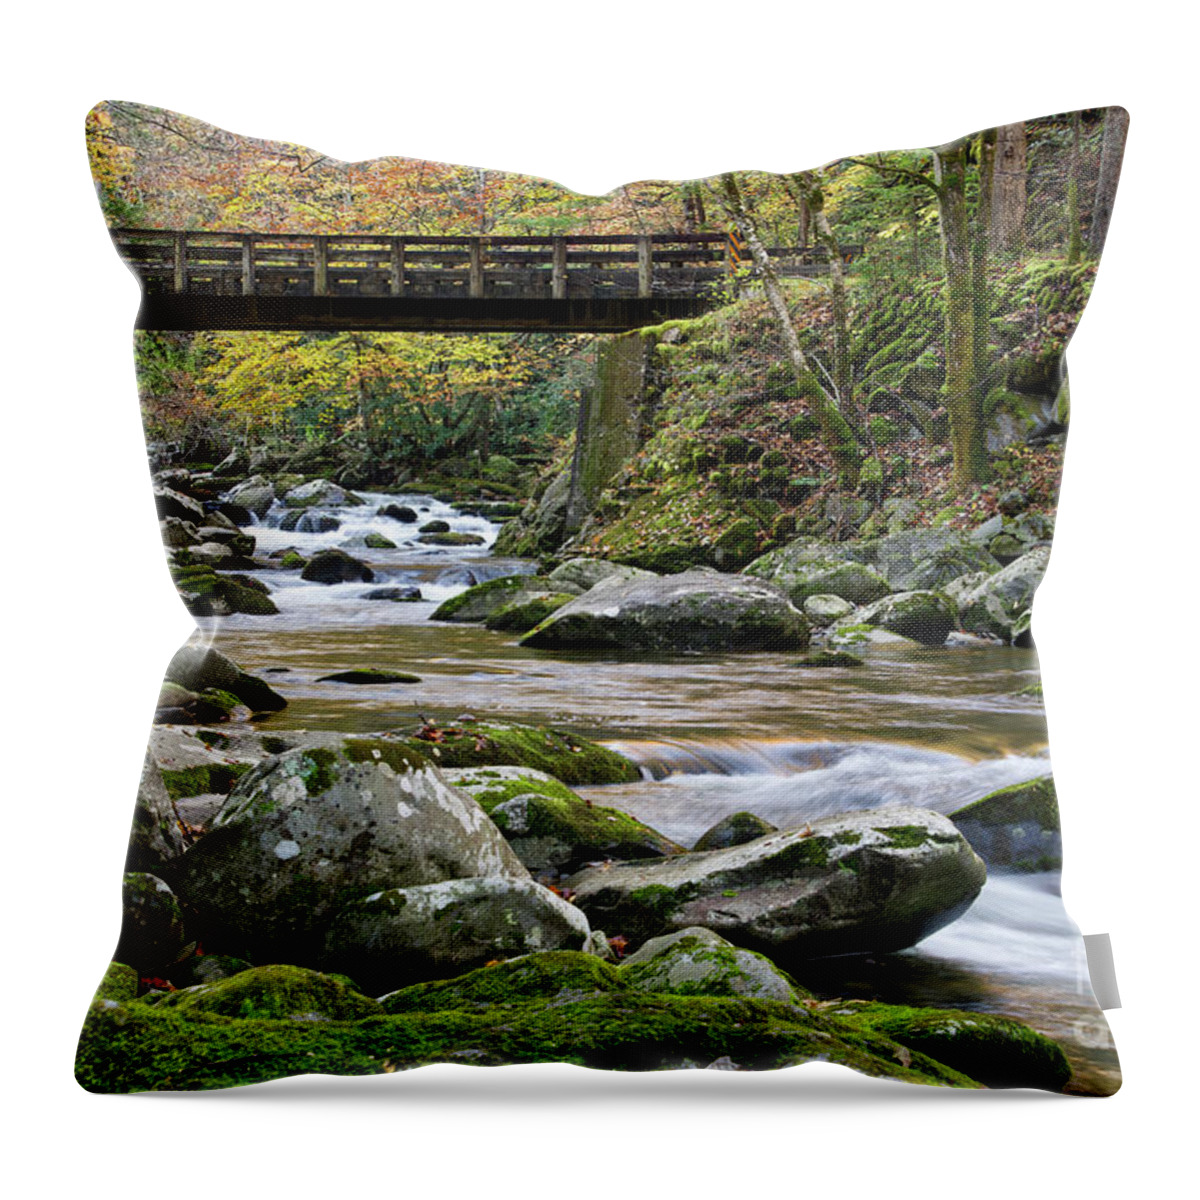 Autumn Throw Pillow featuring the photograph Rustic Wooden Bridge by Phil Perkins